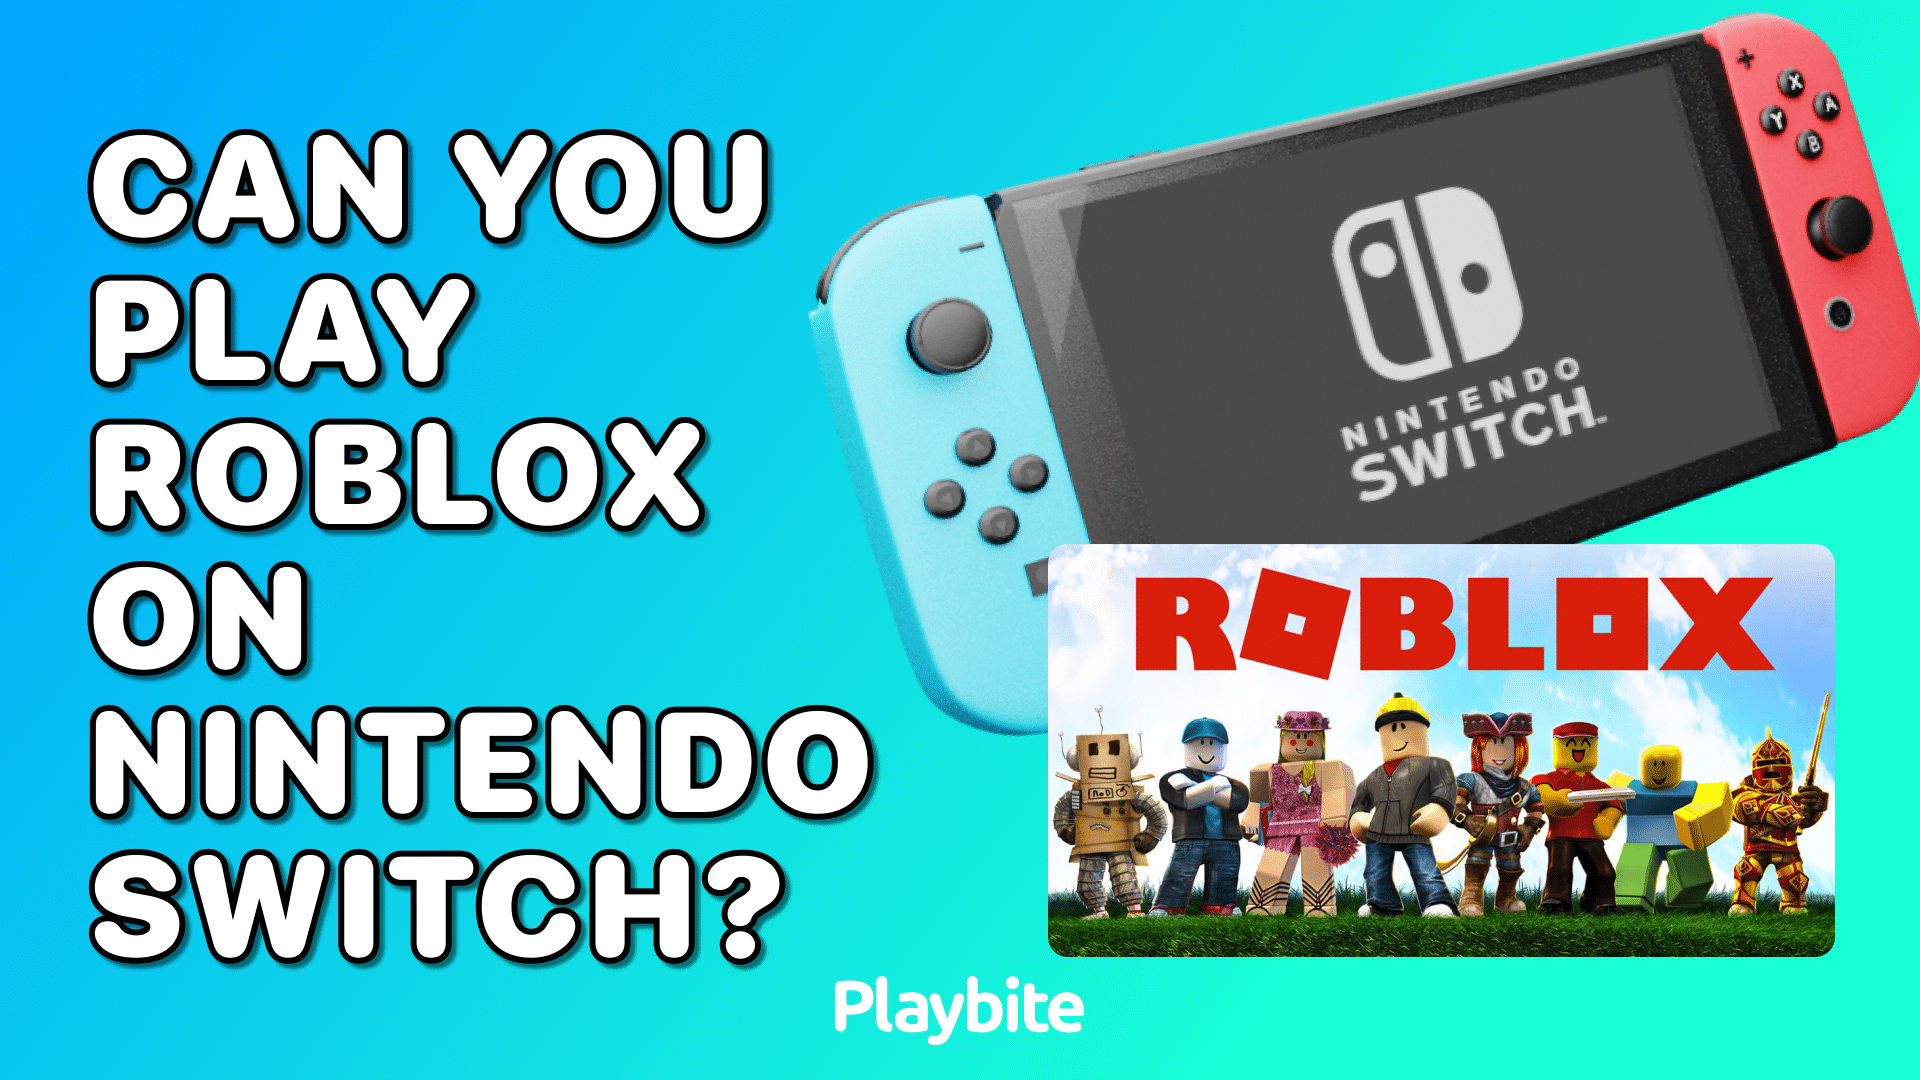 Roblox On Nintendo Switch In 2023 